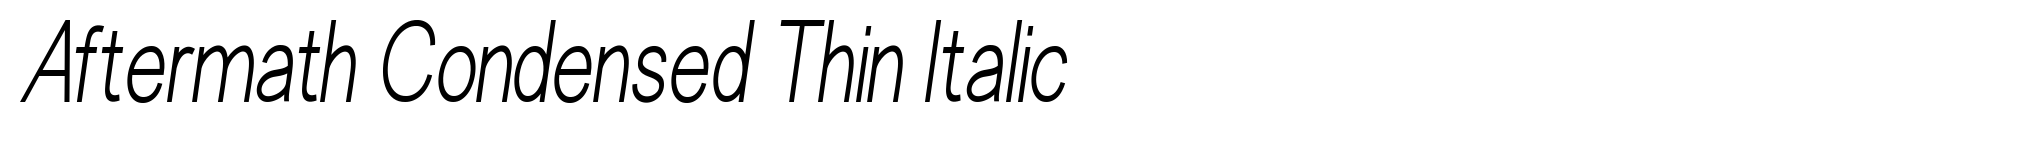 Aftermath Condensed Thin Italic image